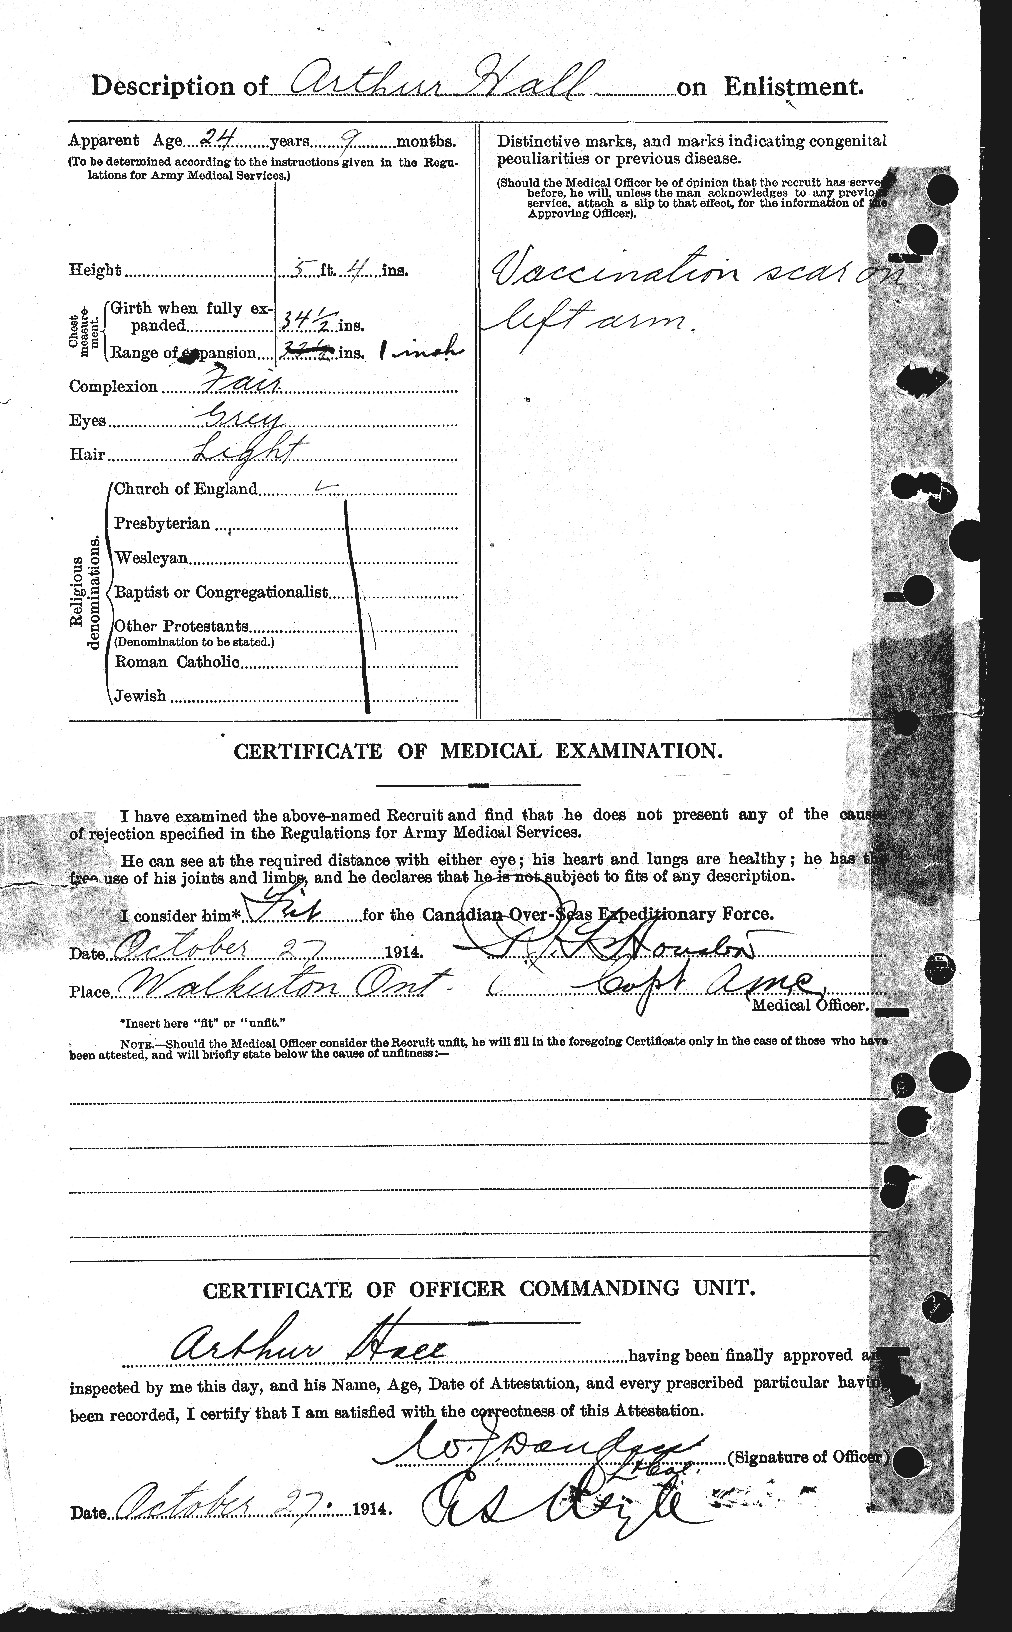 Personnel Records of the First World War - CEF 372546b